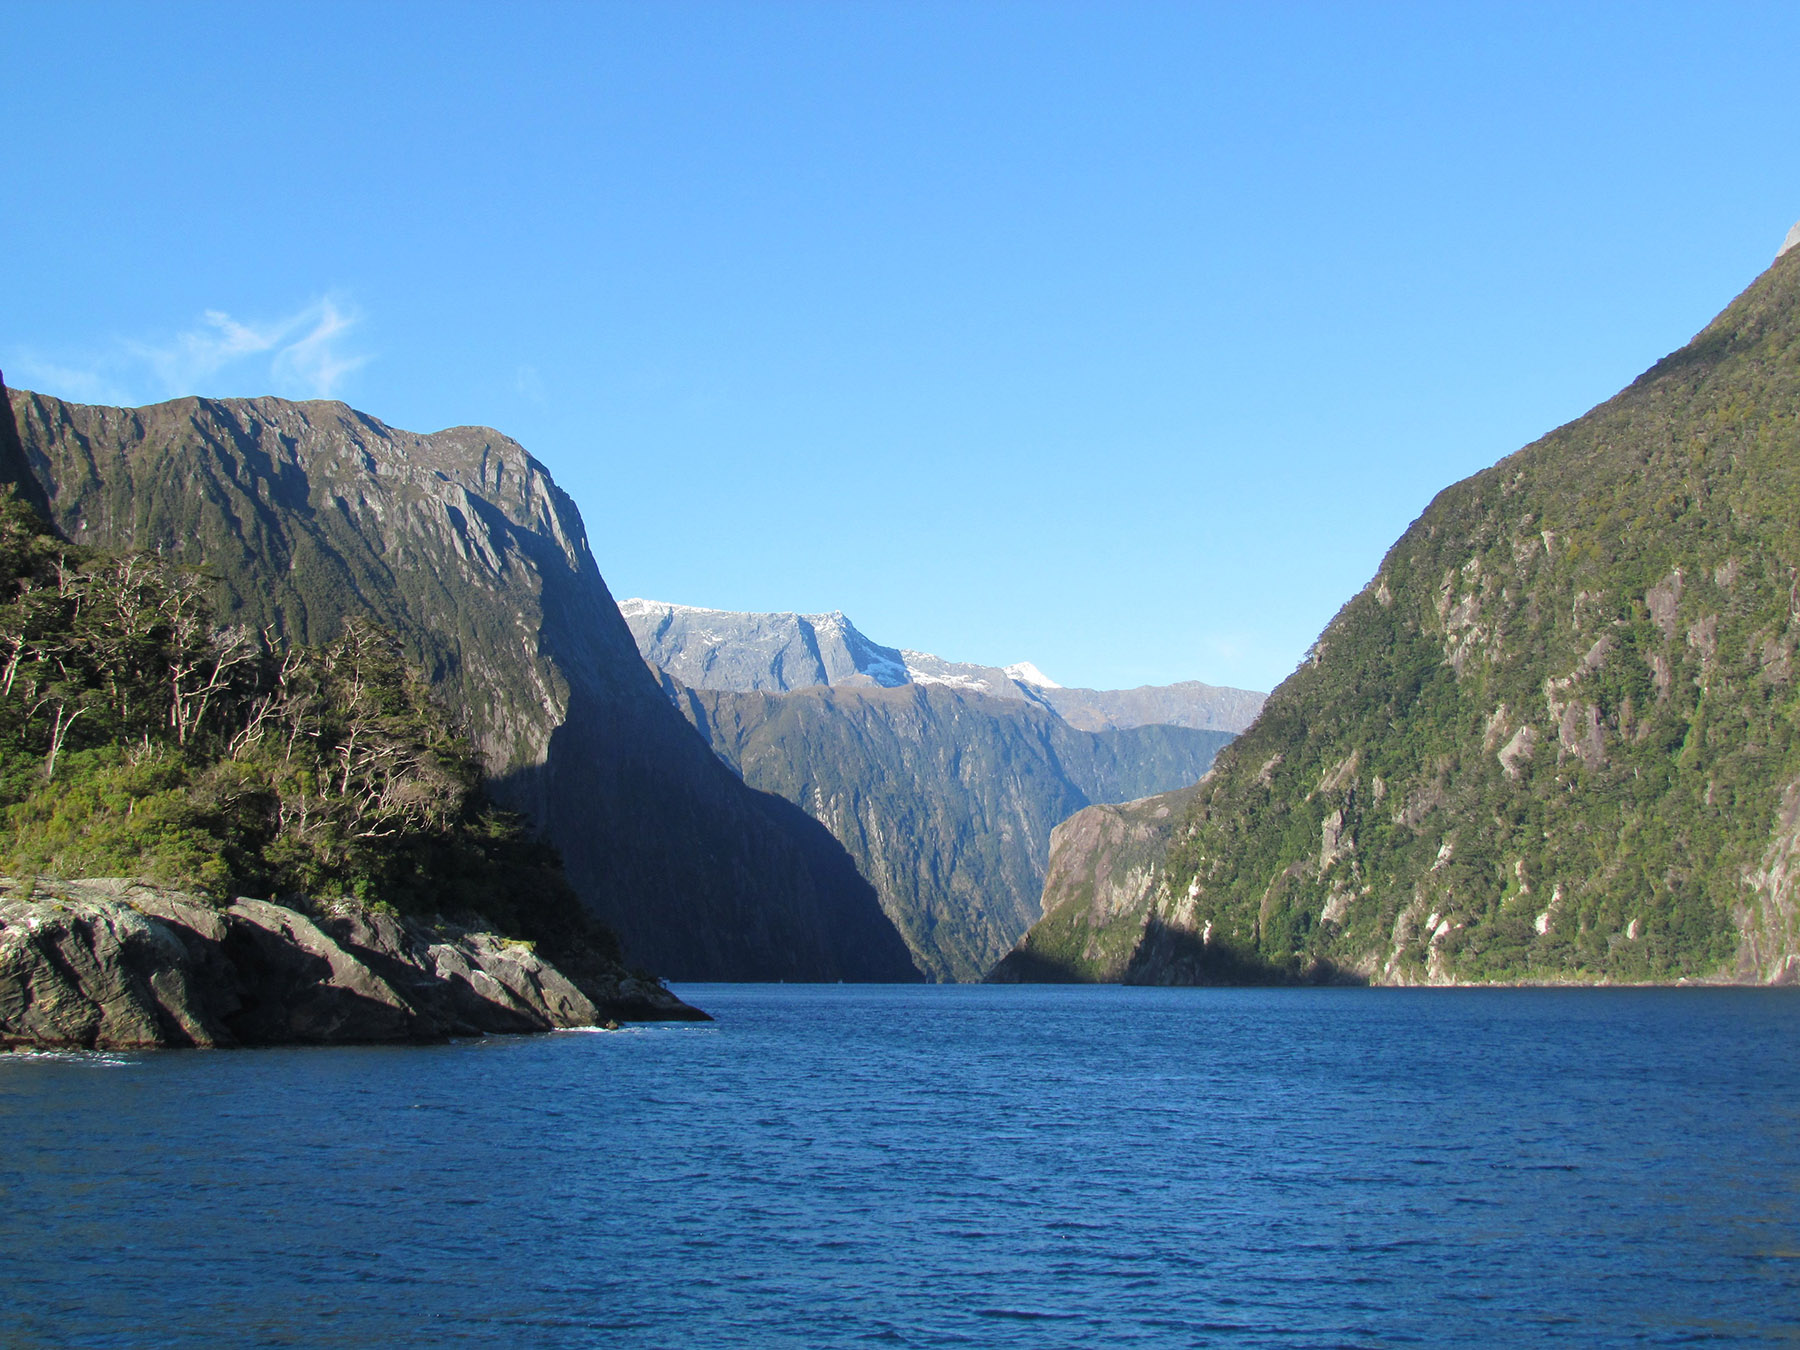 Milford Sound (photo by Elaine Fagner)